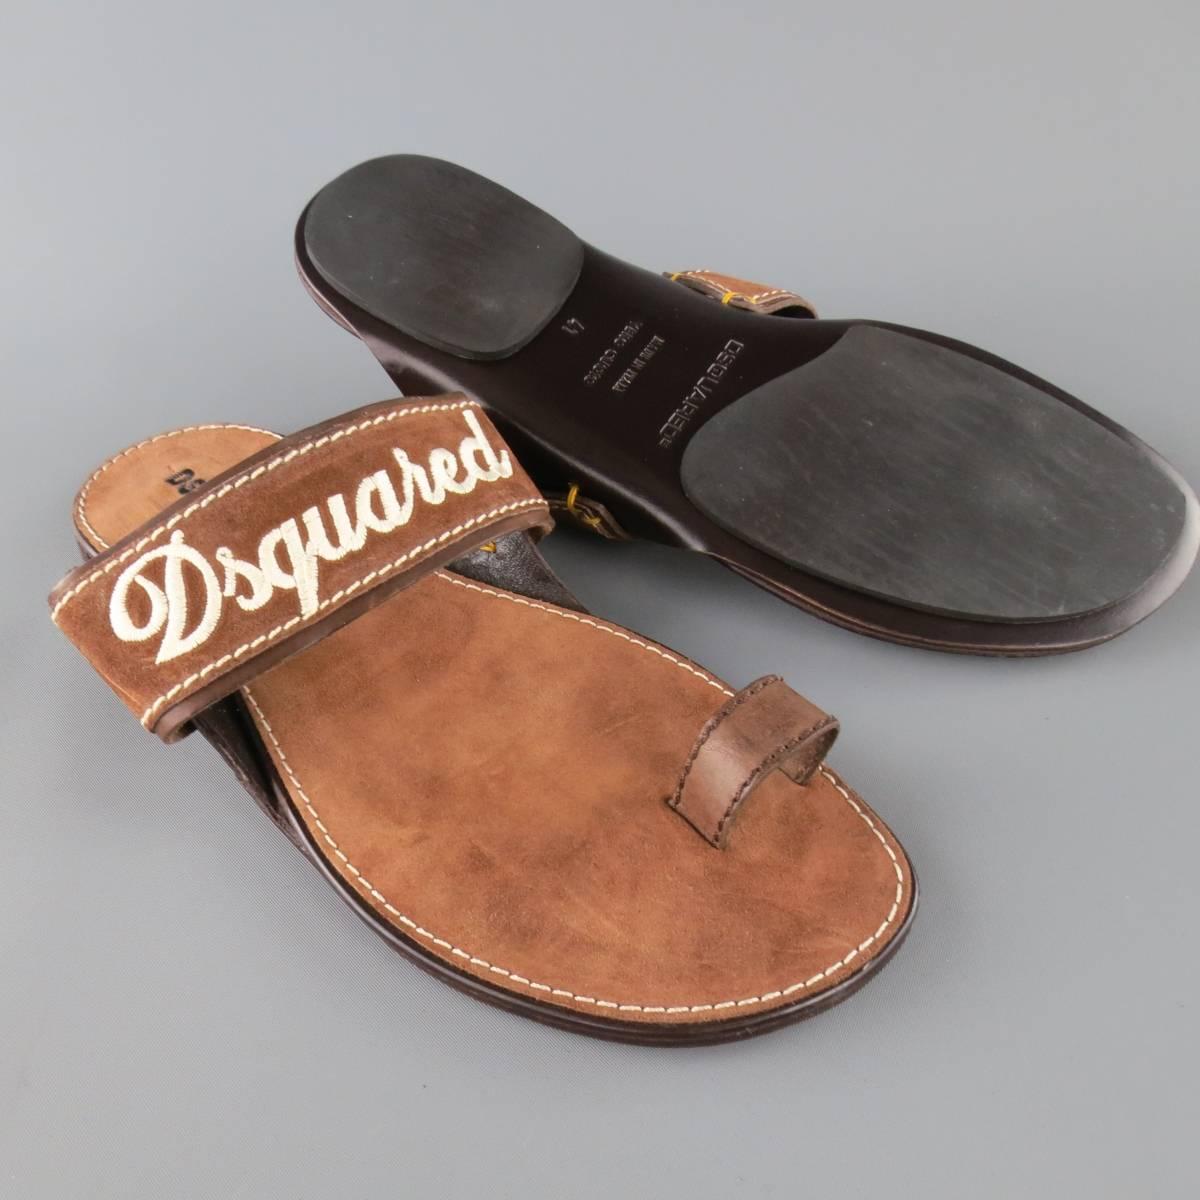 DSQUARED2 sandals feature a thick tan brown suede strap with cream embroidered logo and leather toe strap. Made in Italy.
 
Excellent Pre-Owned Condition.
Marked: 41


Web ID: 83156 